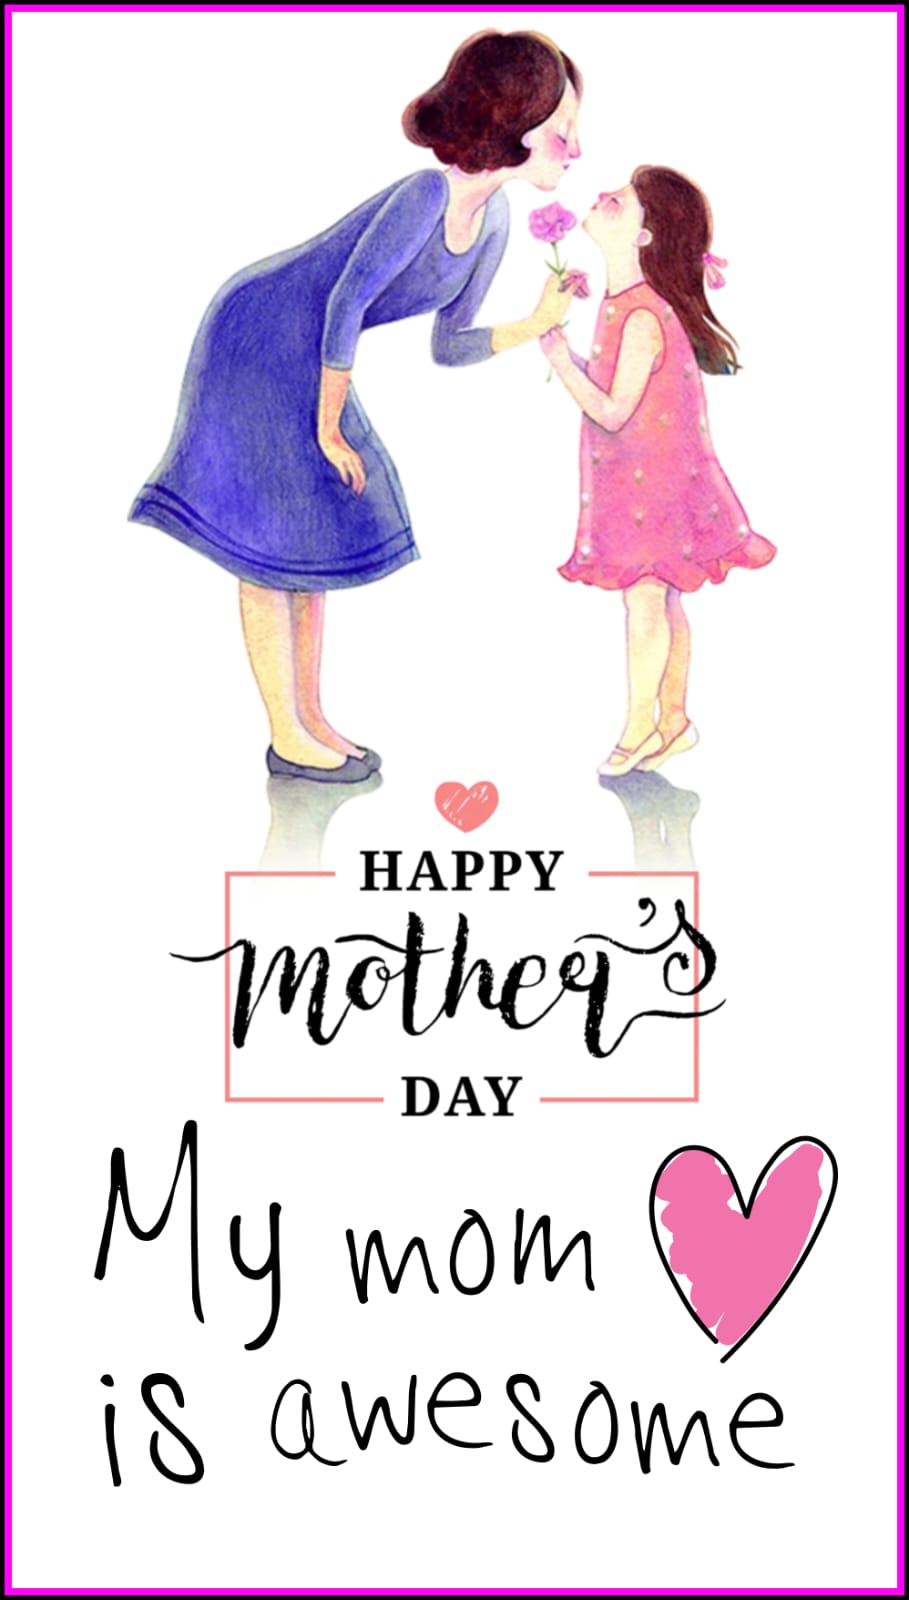 Happy Mother's Day wishes images in Hindi | हैप्पी ...